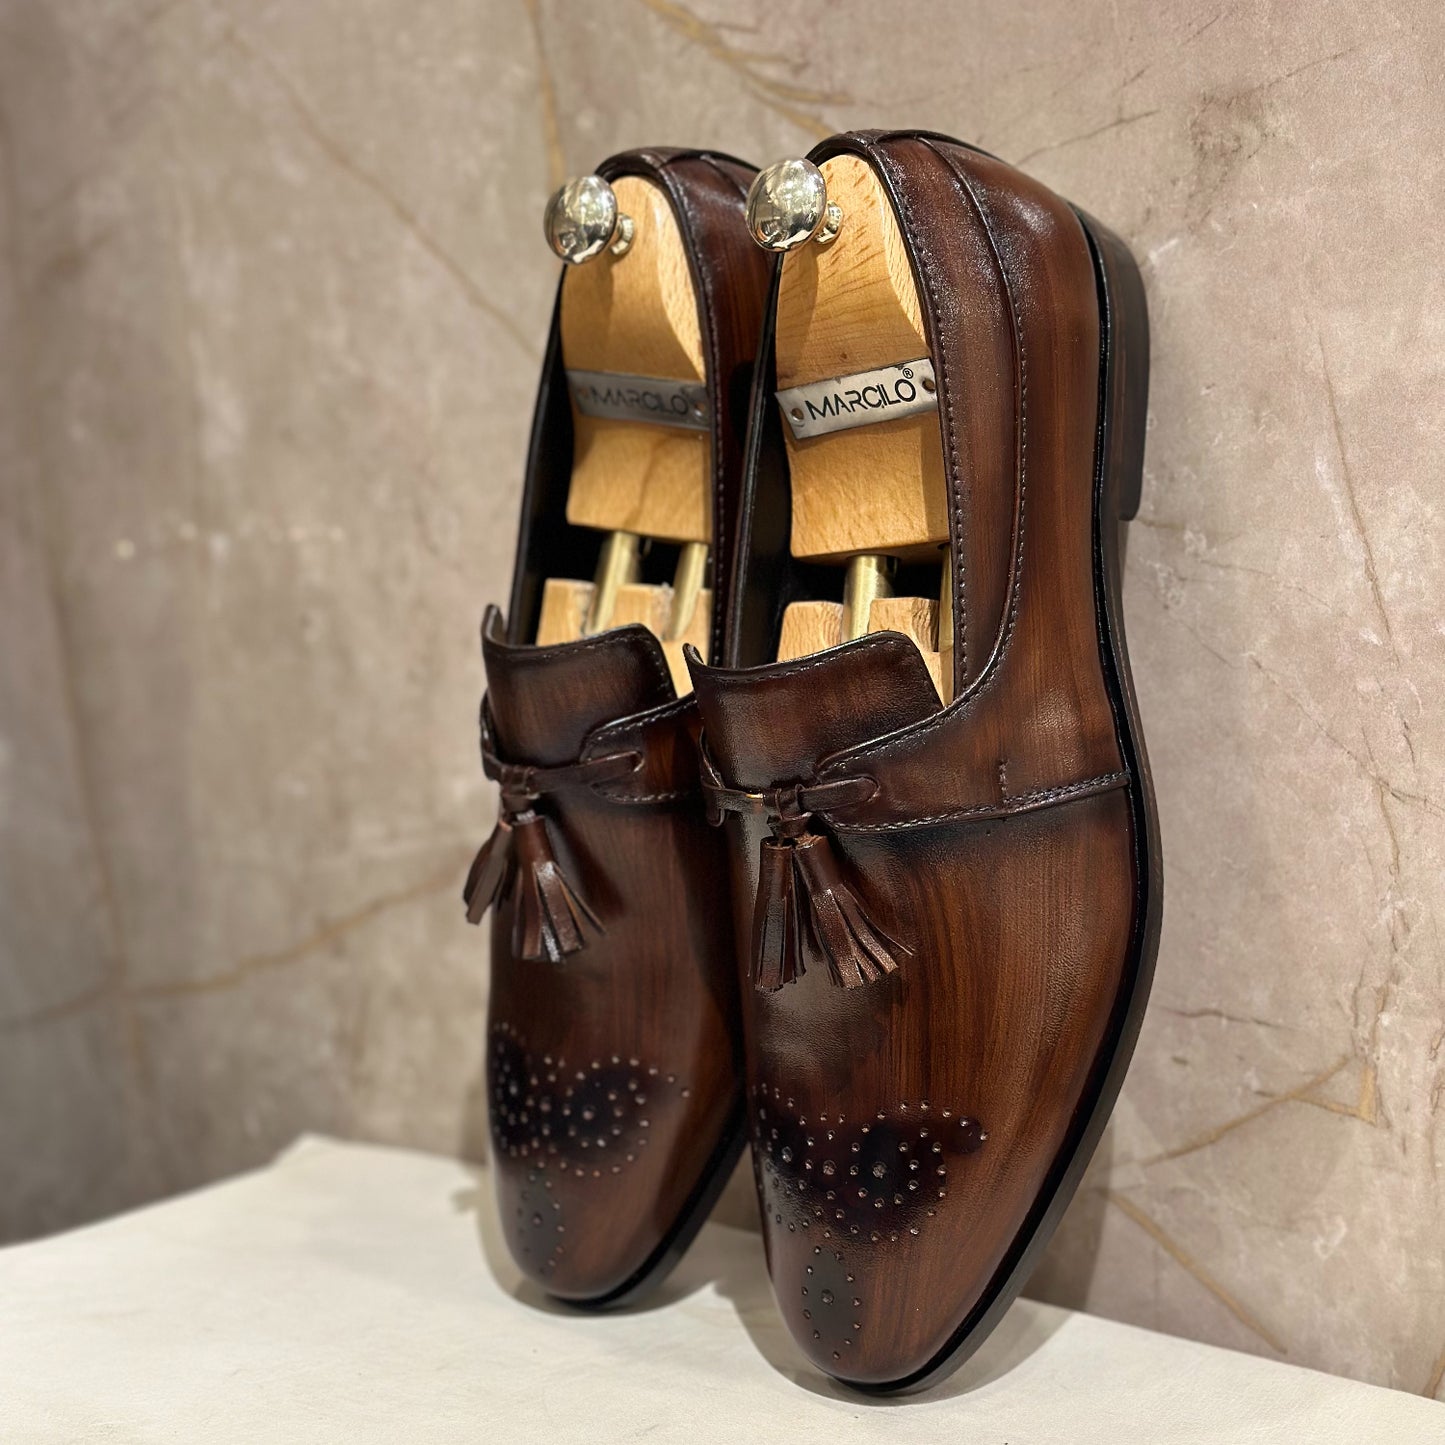 Brown Shaded Toe Brogue Tassel Loafers